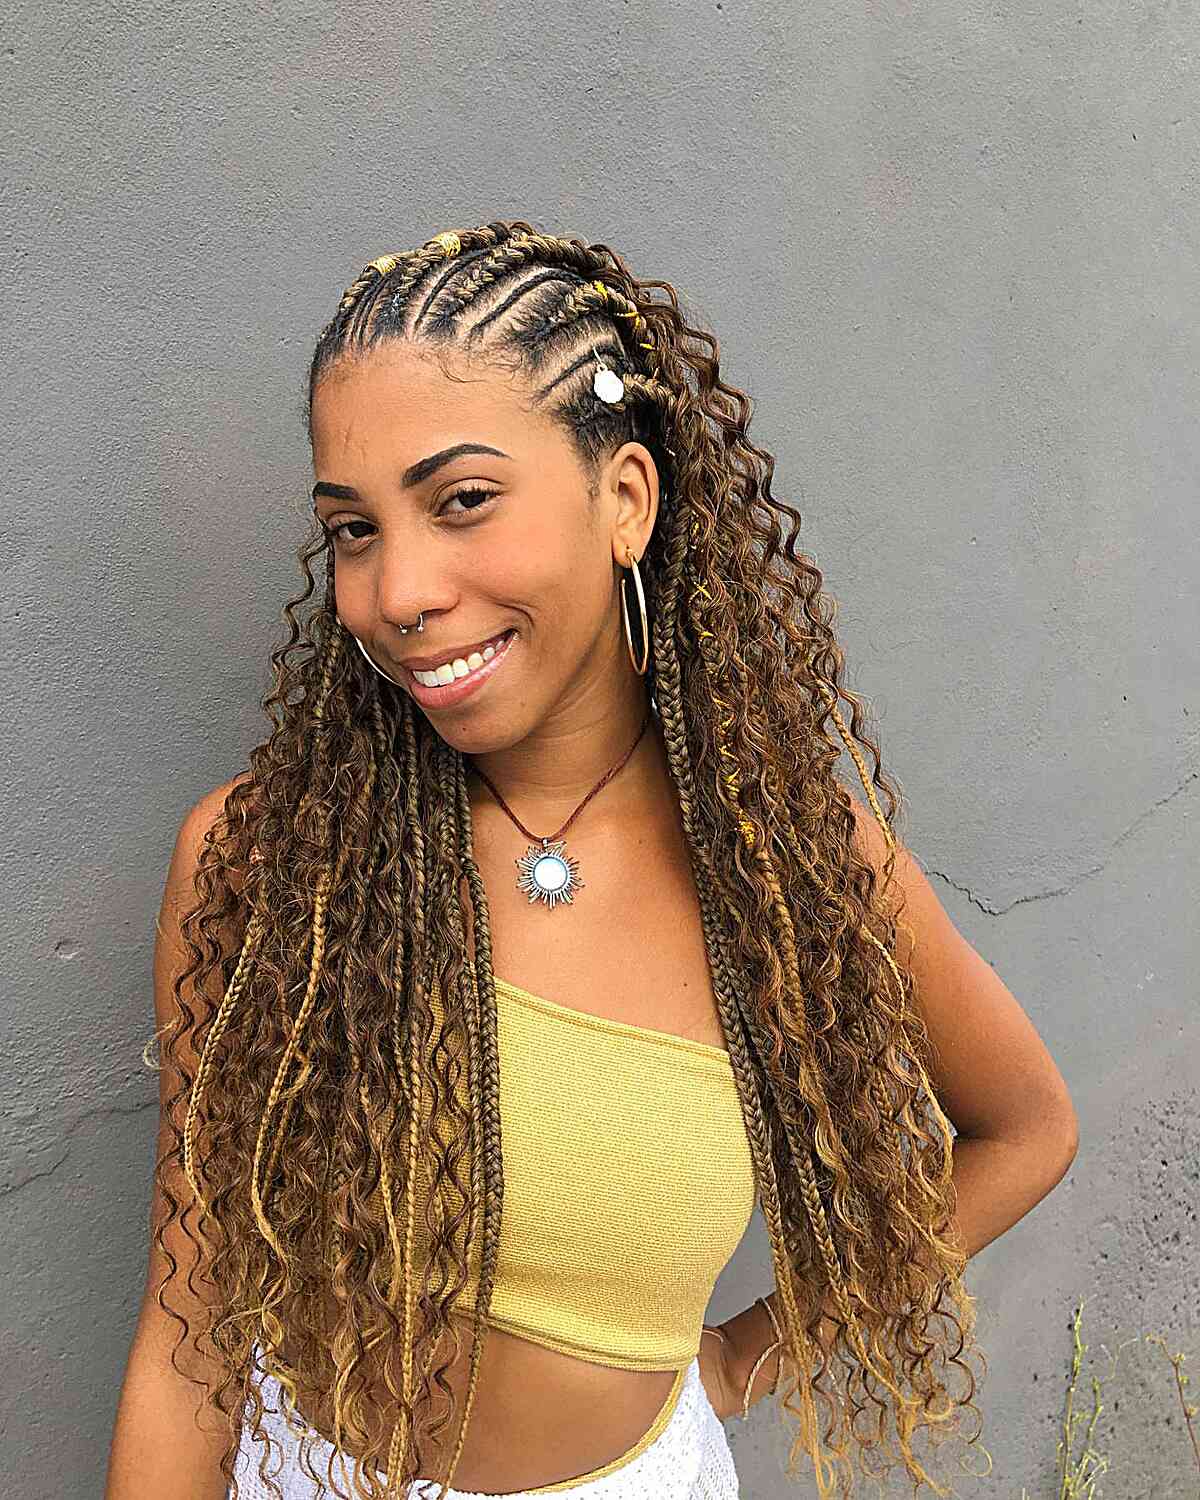 Waist-Length Black and Blonde Fulani Knotless Box Braids with Accessories